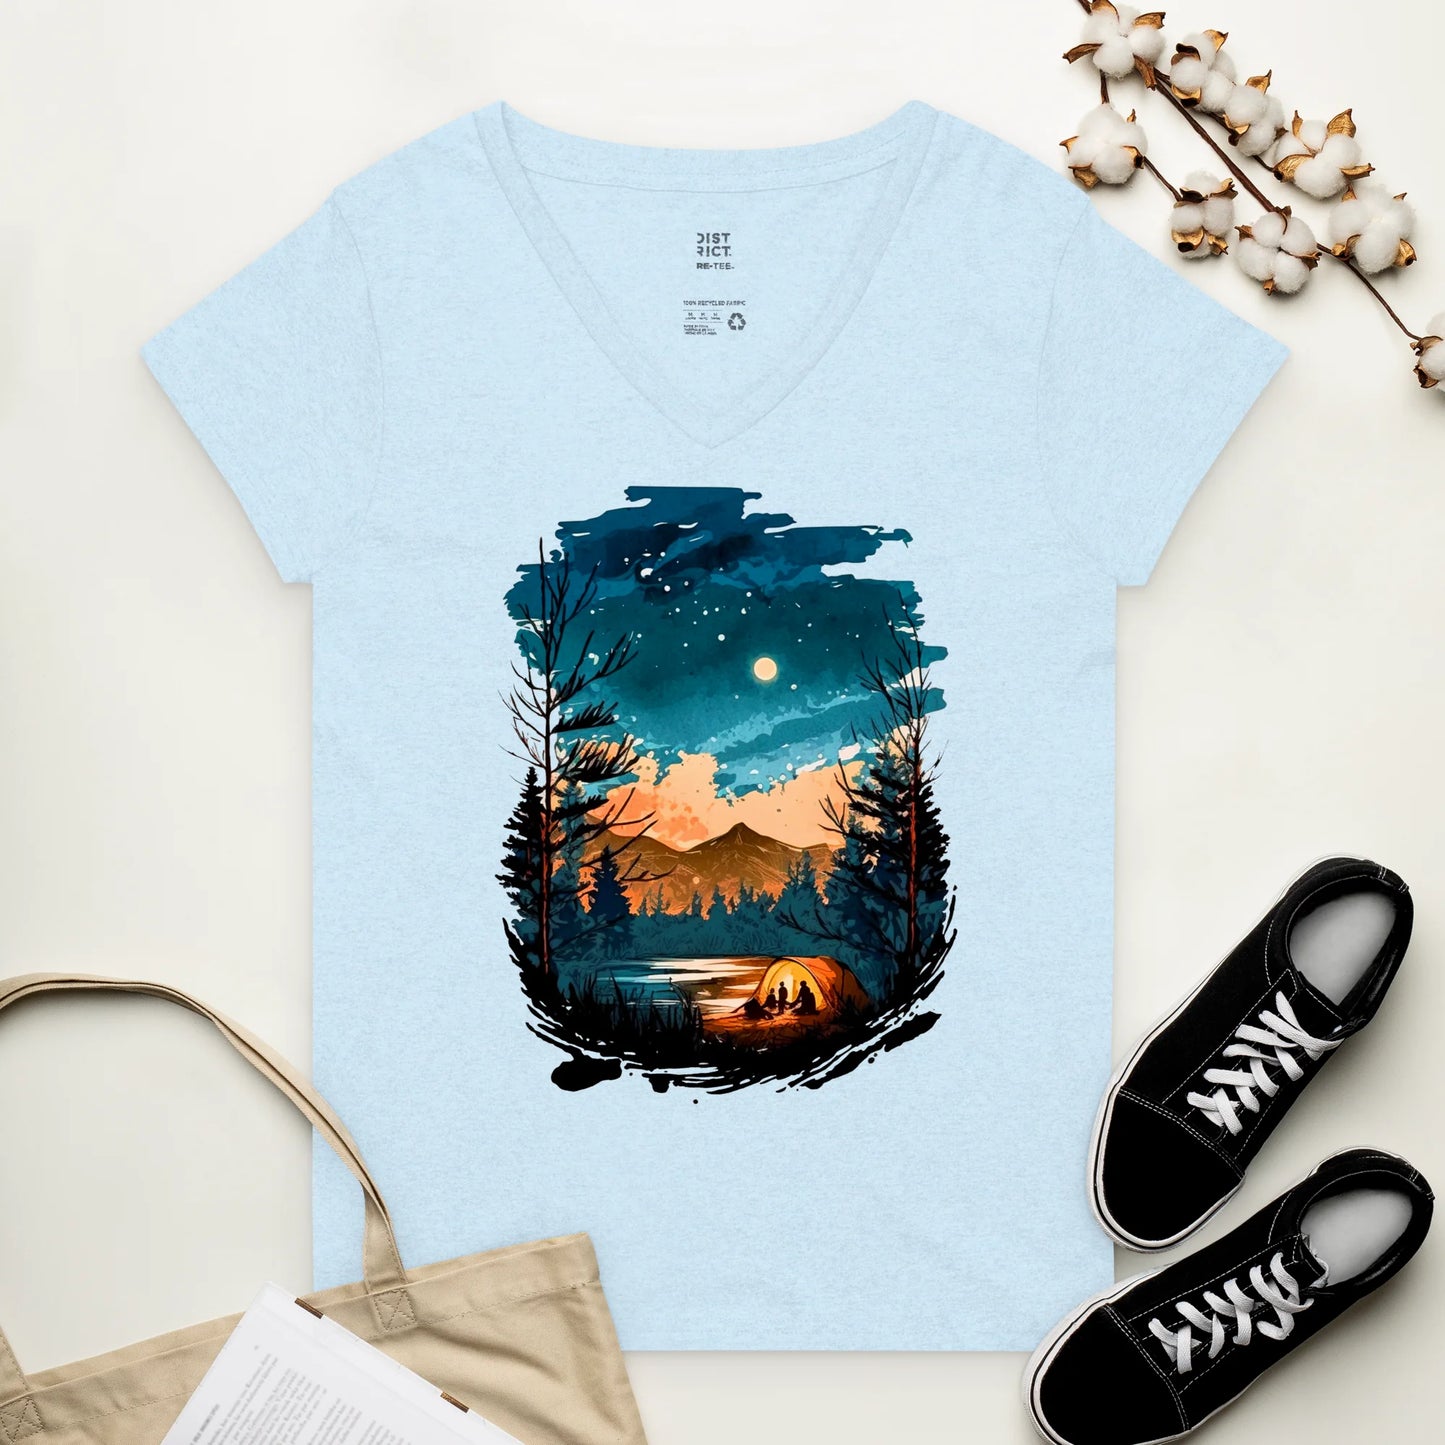 "Lost in Nature's Embrace" Recycled V-neck T-shirt